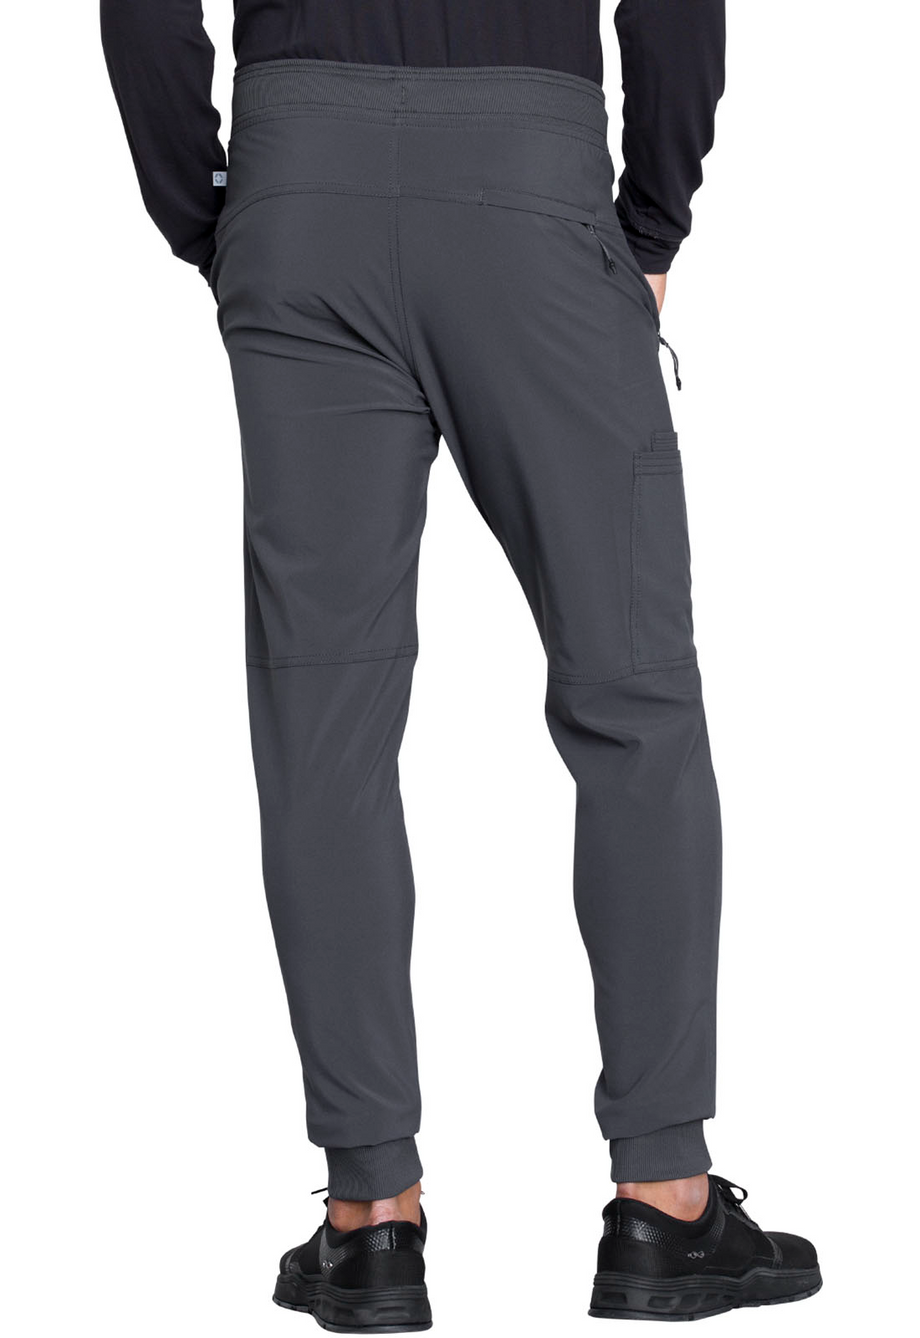 CHEROKEE Men's Drawstring Cargo Scrub Pant, Pewter, X-Small Black :  : Clothing, Shoes & Accessories